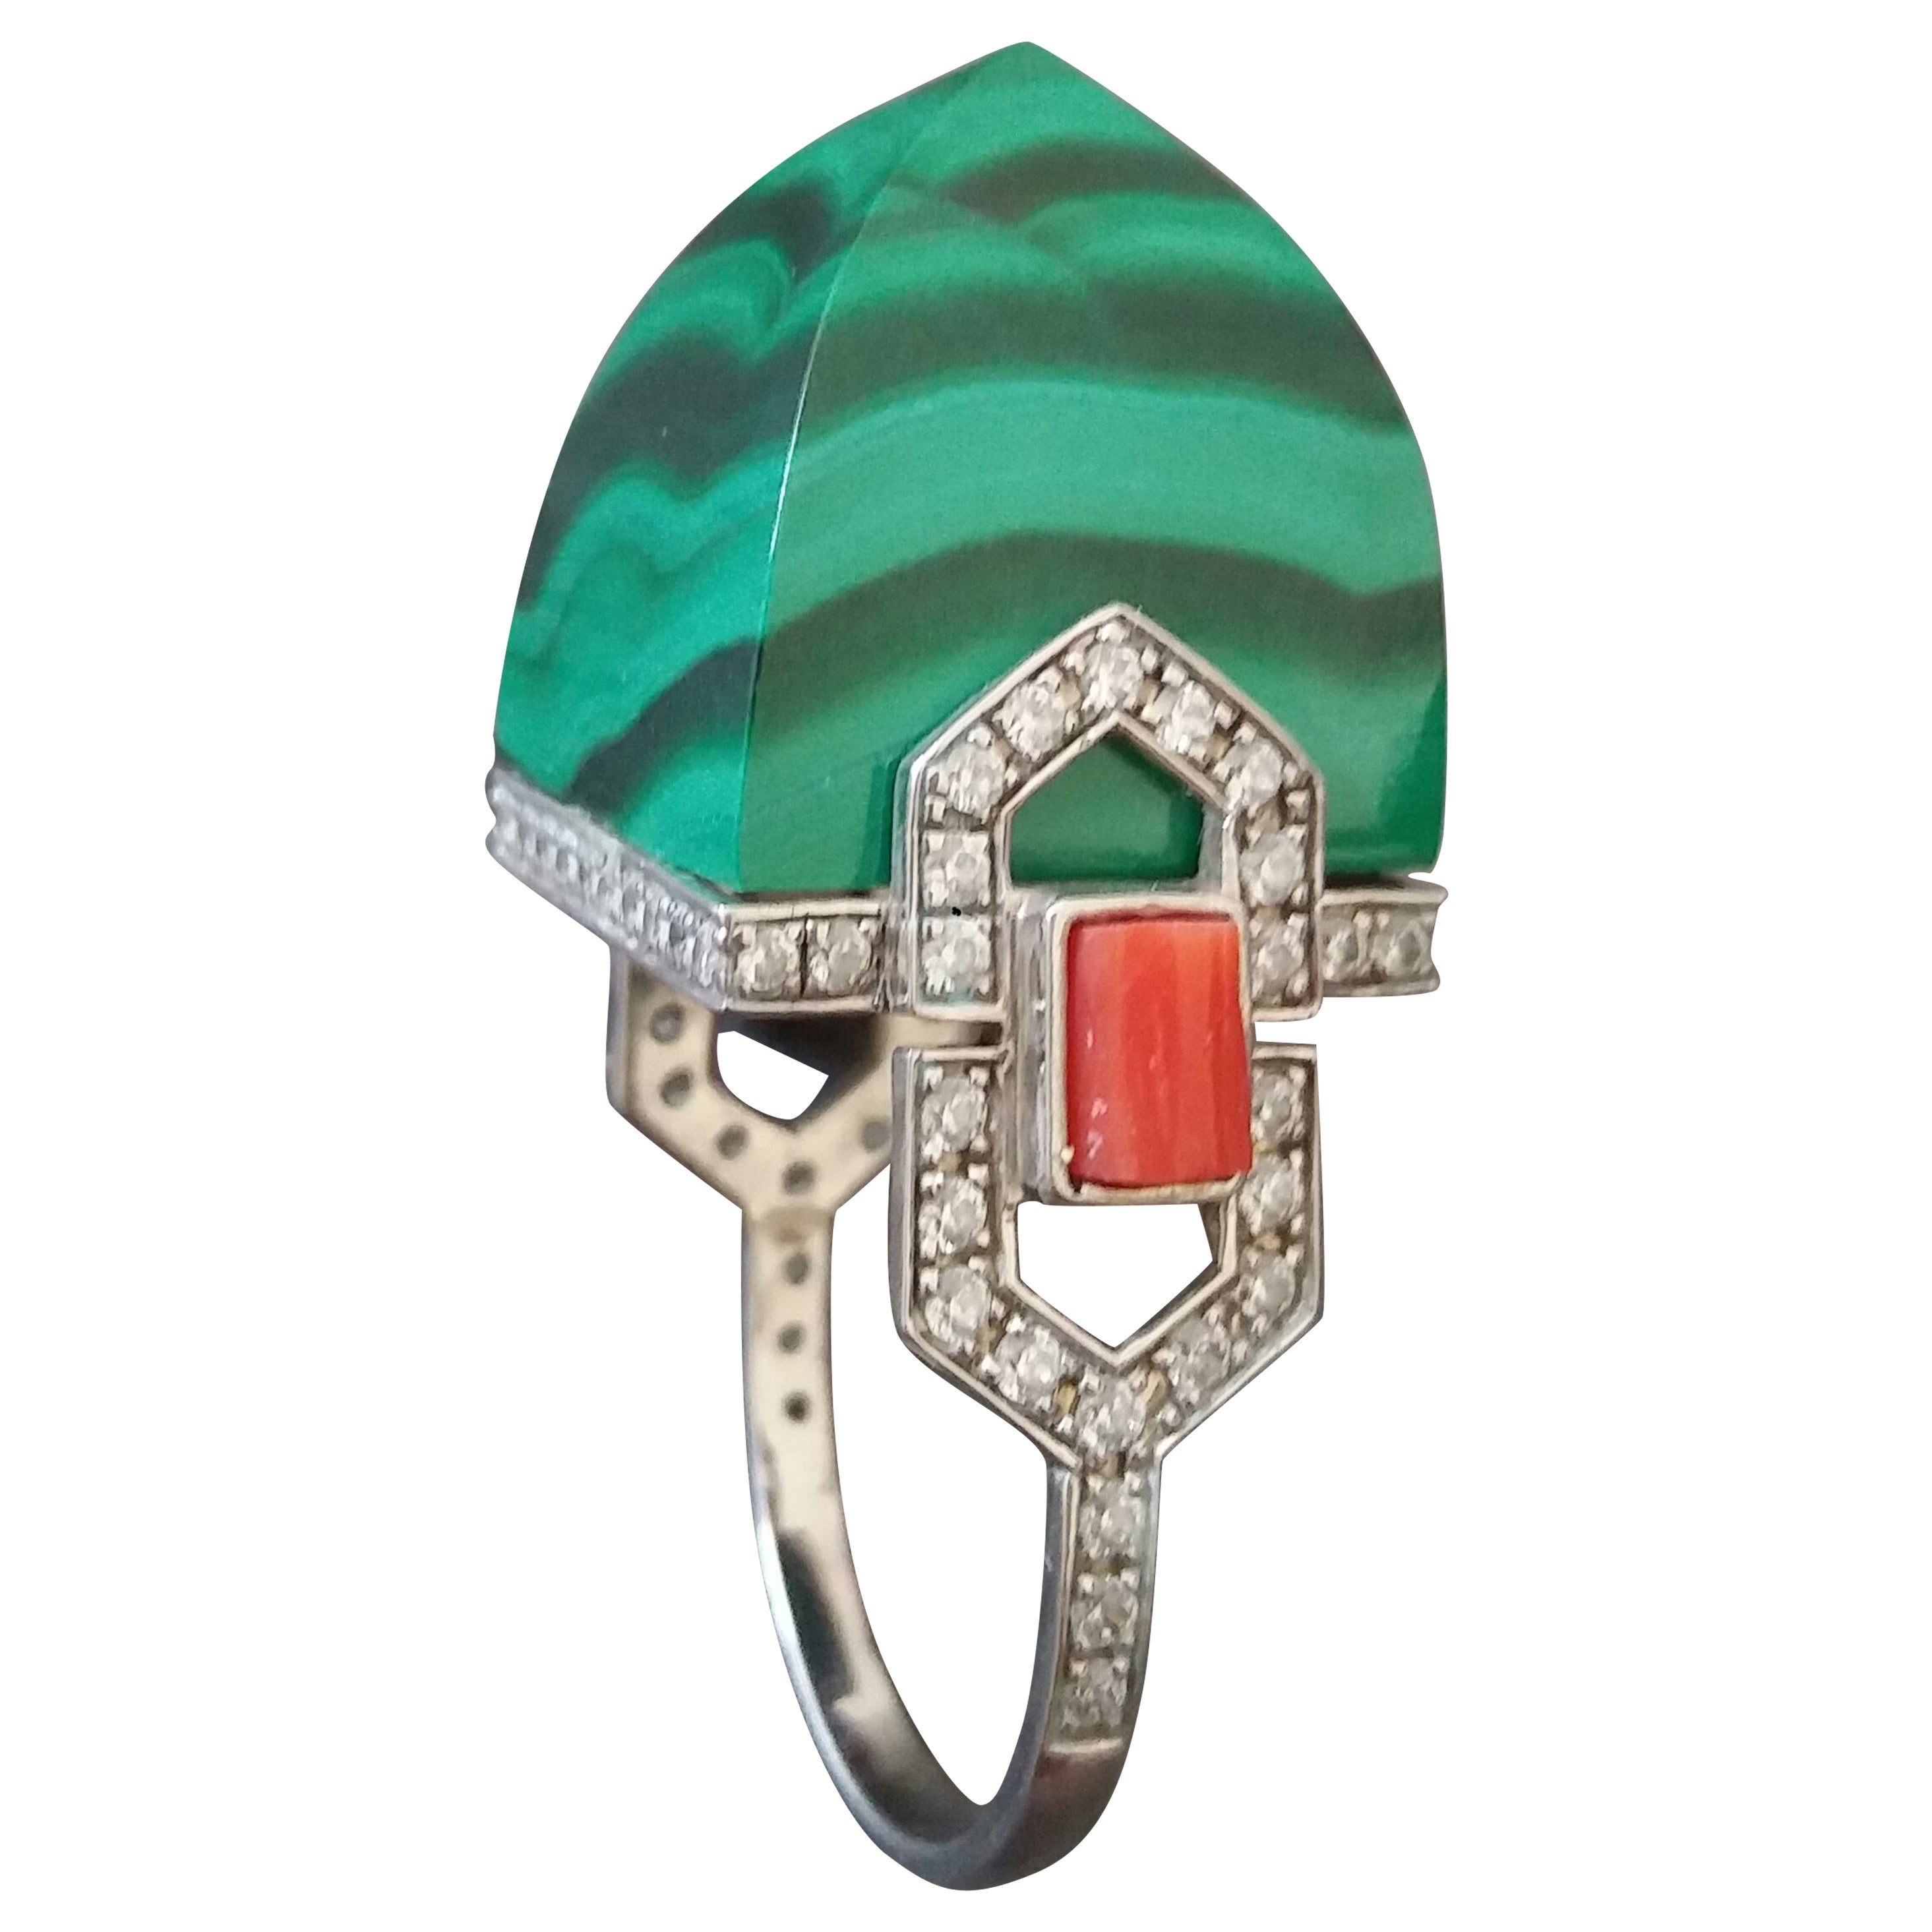 Art Deco Style 14K Solid Gold Diamonds 50 Carat Malachite Pyramid Cocktail Ring For Sale